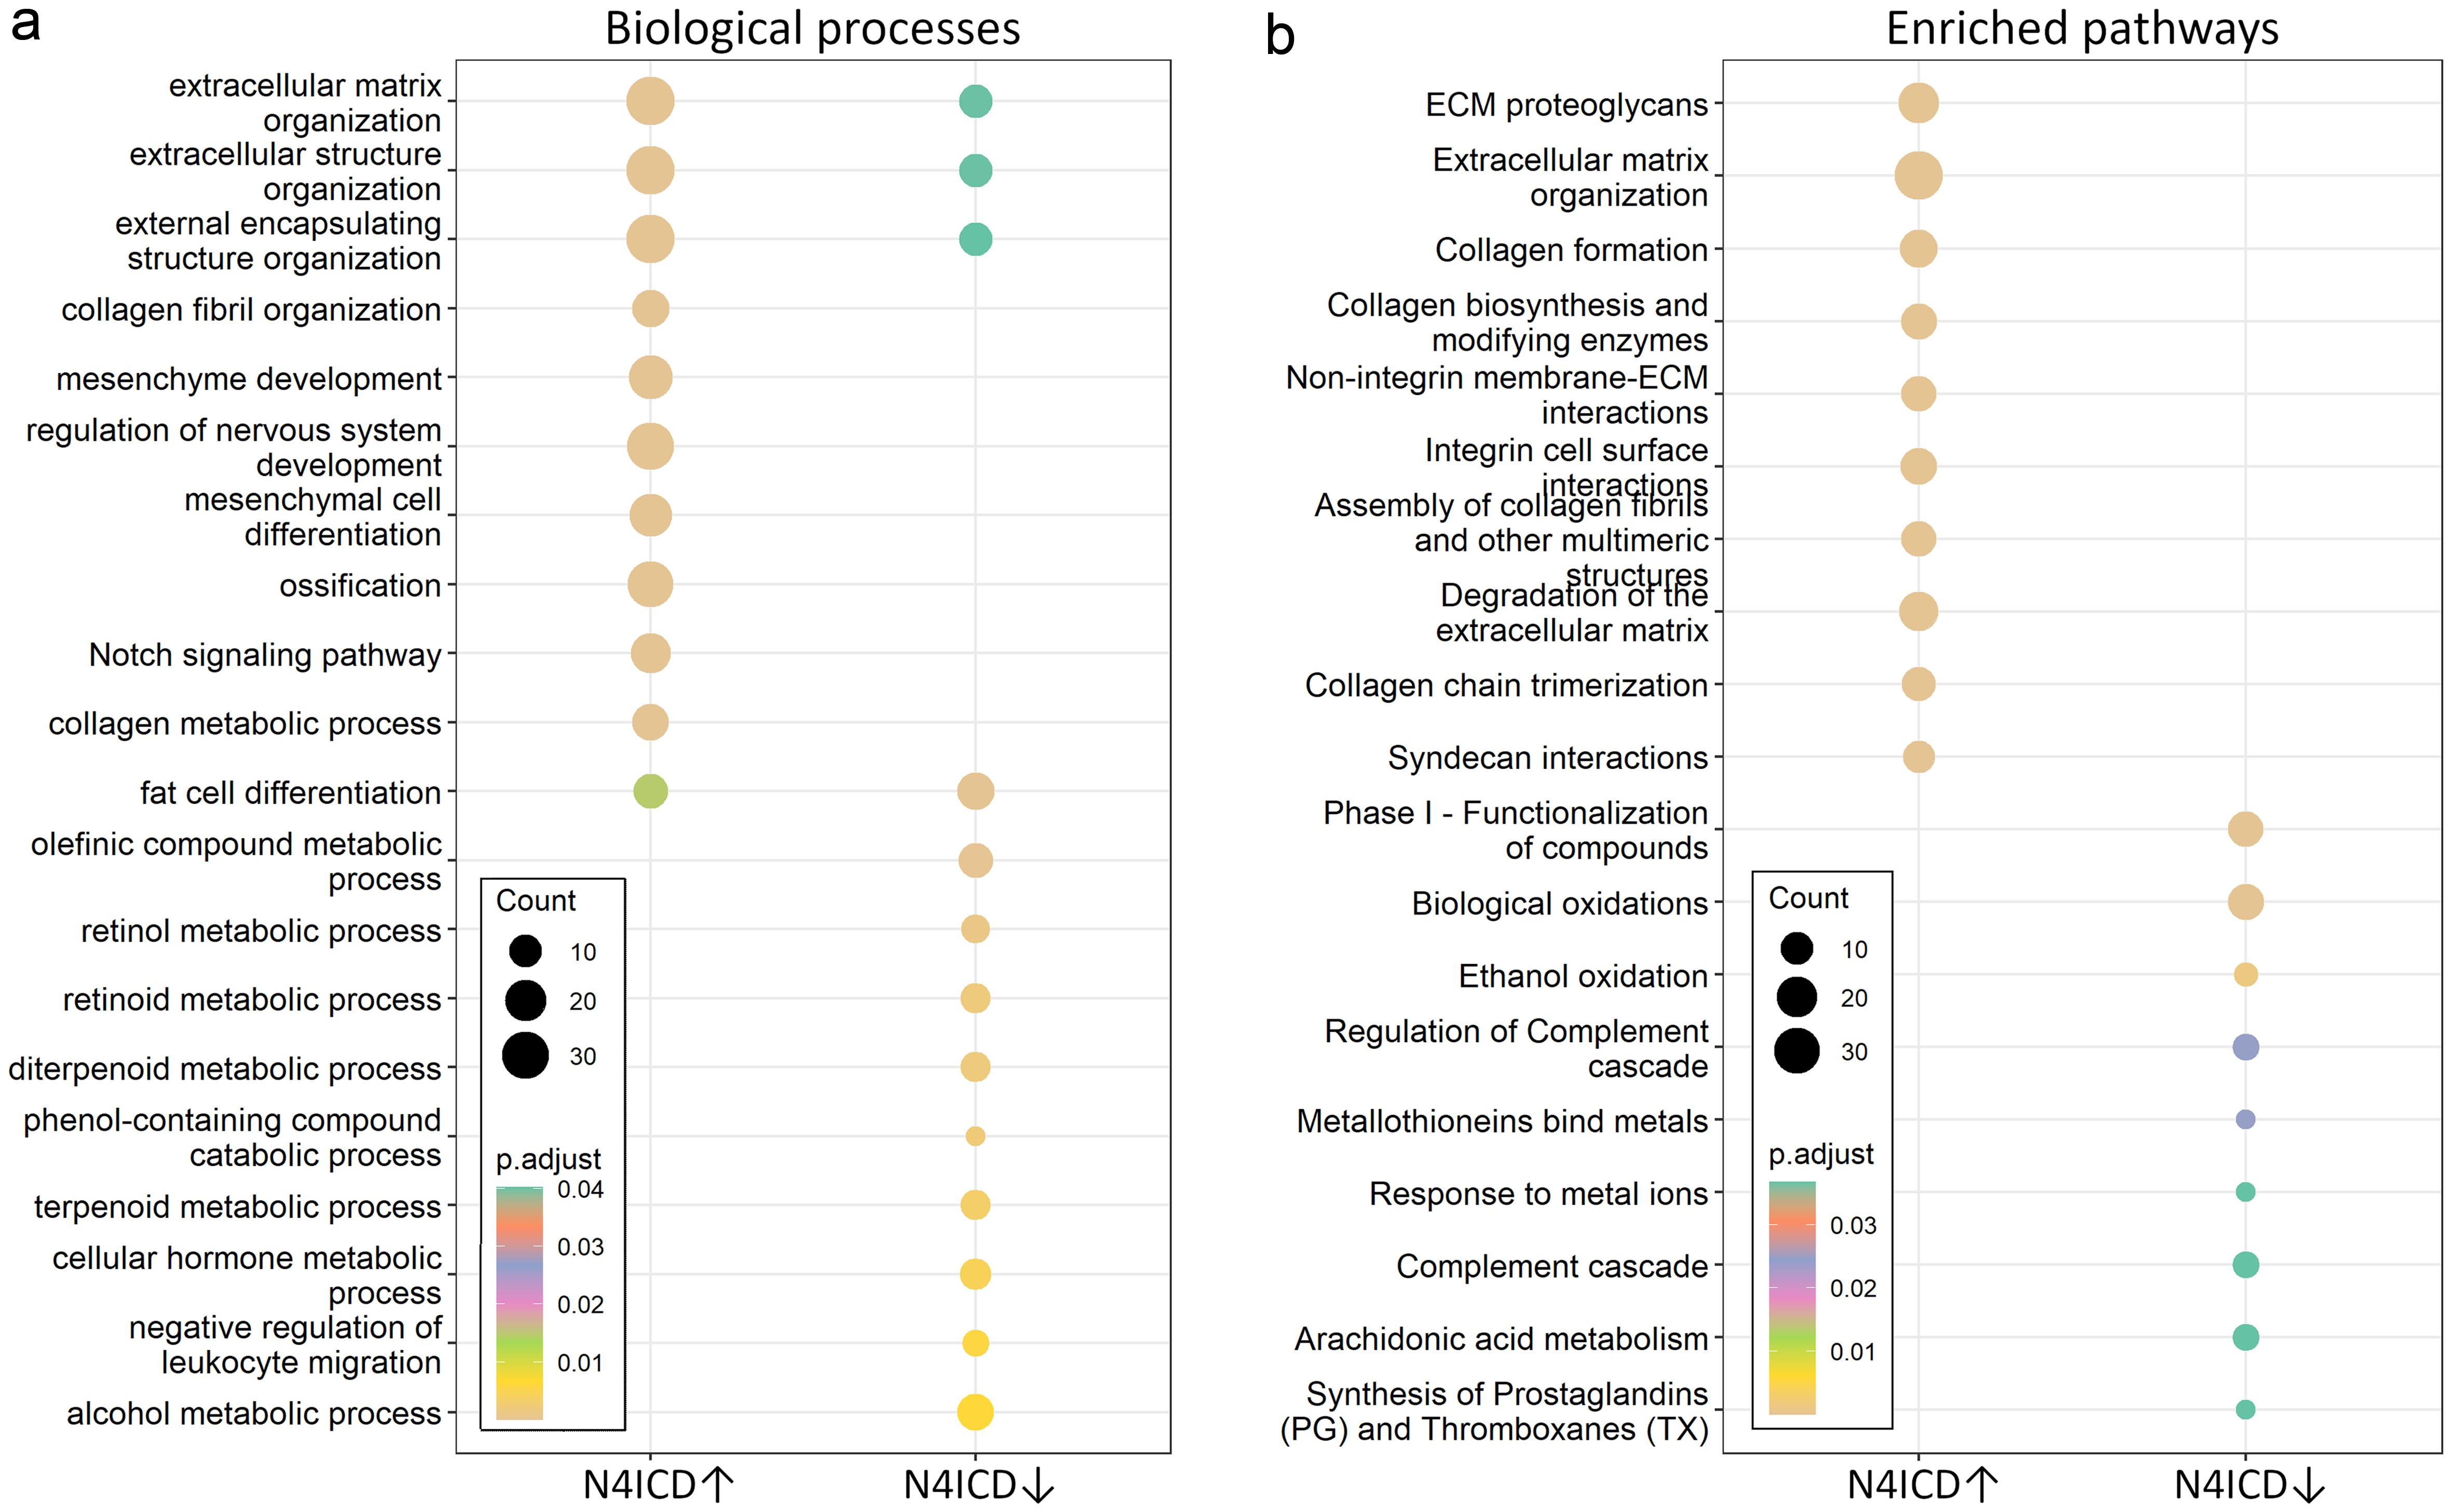 Enrichment analysis of differentially expressed genes that are upregulated (N4ICD↑) or downregulated (N4ICD↓) in lung fibroblasts with activated N4ICD, as compared to the control samples pCIG, conducted using (a) the “Biological Processes” Gene Ontology and (b) pathways according to the Reactome Pathway database.